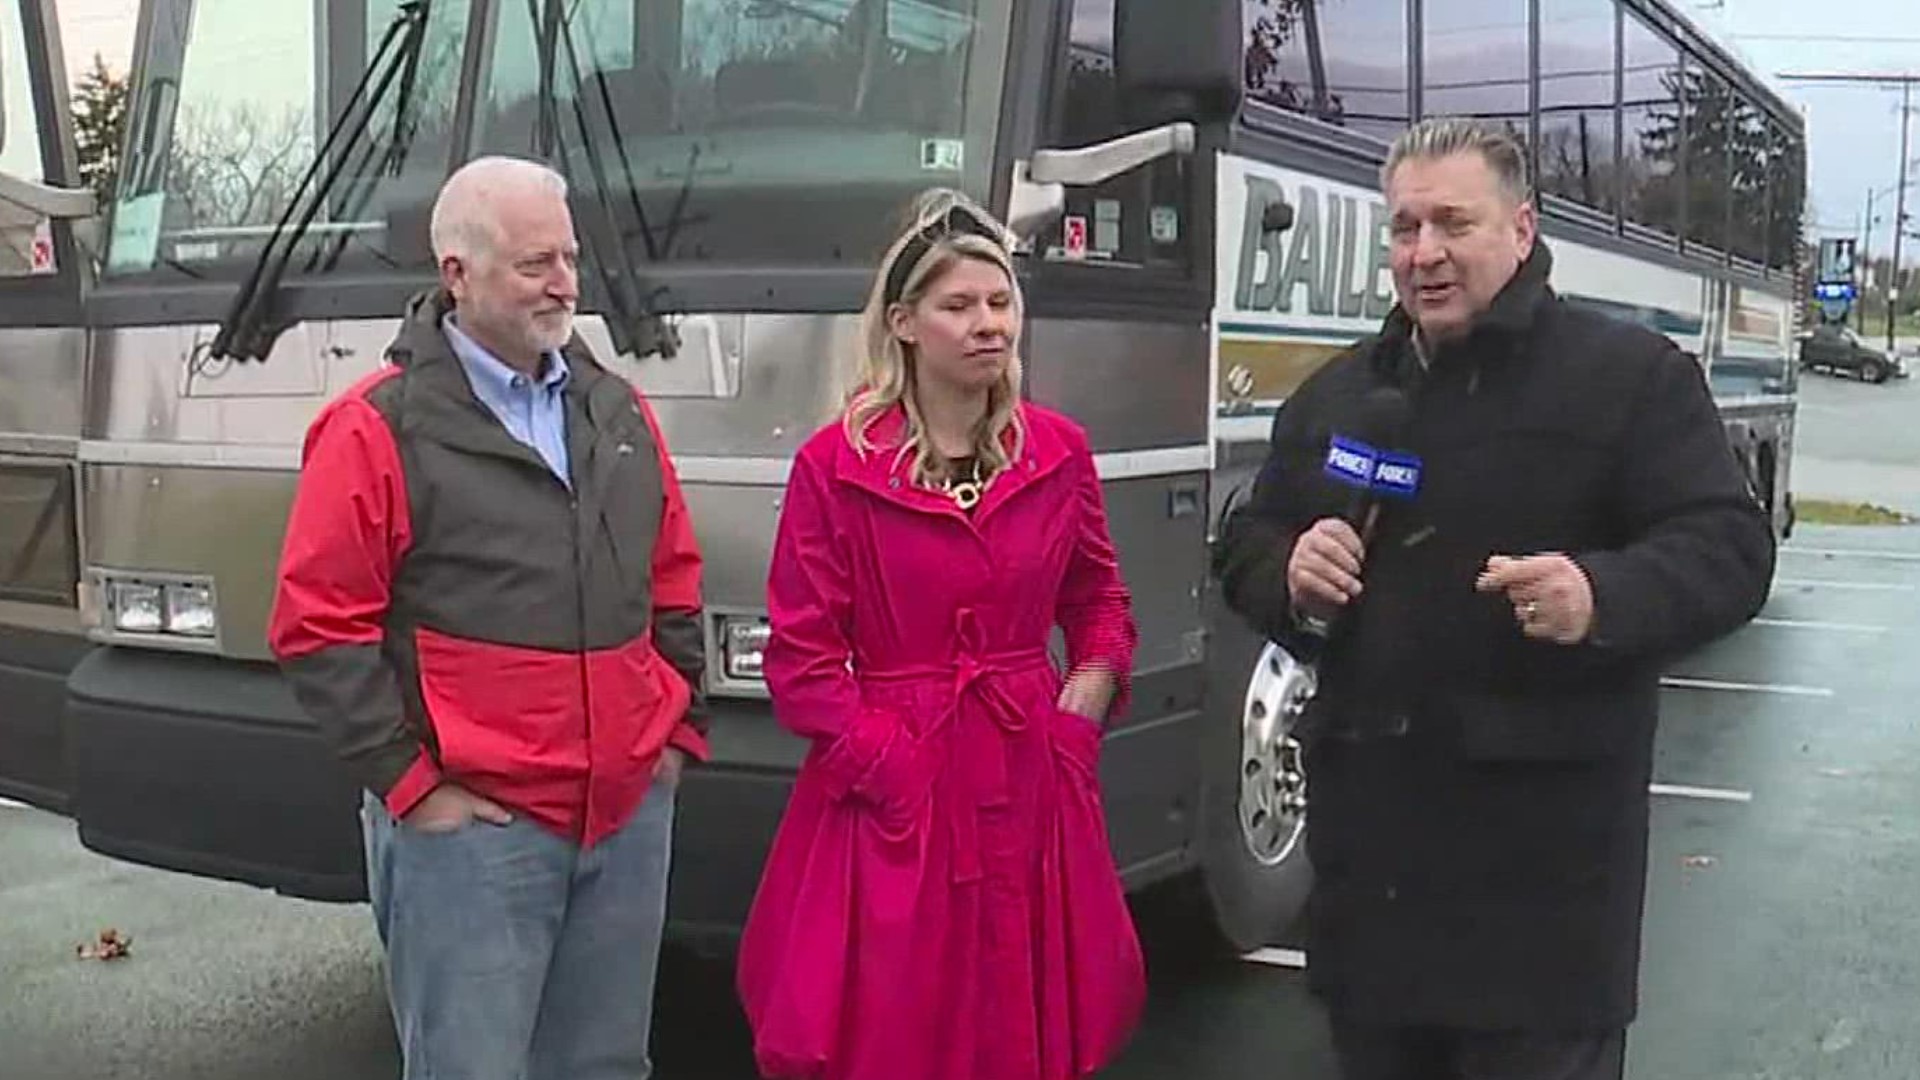 On Monday, Bailey Coach, with the help of FOX43's Evan Forrester, announced the winner of the bus.